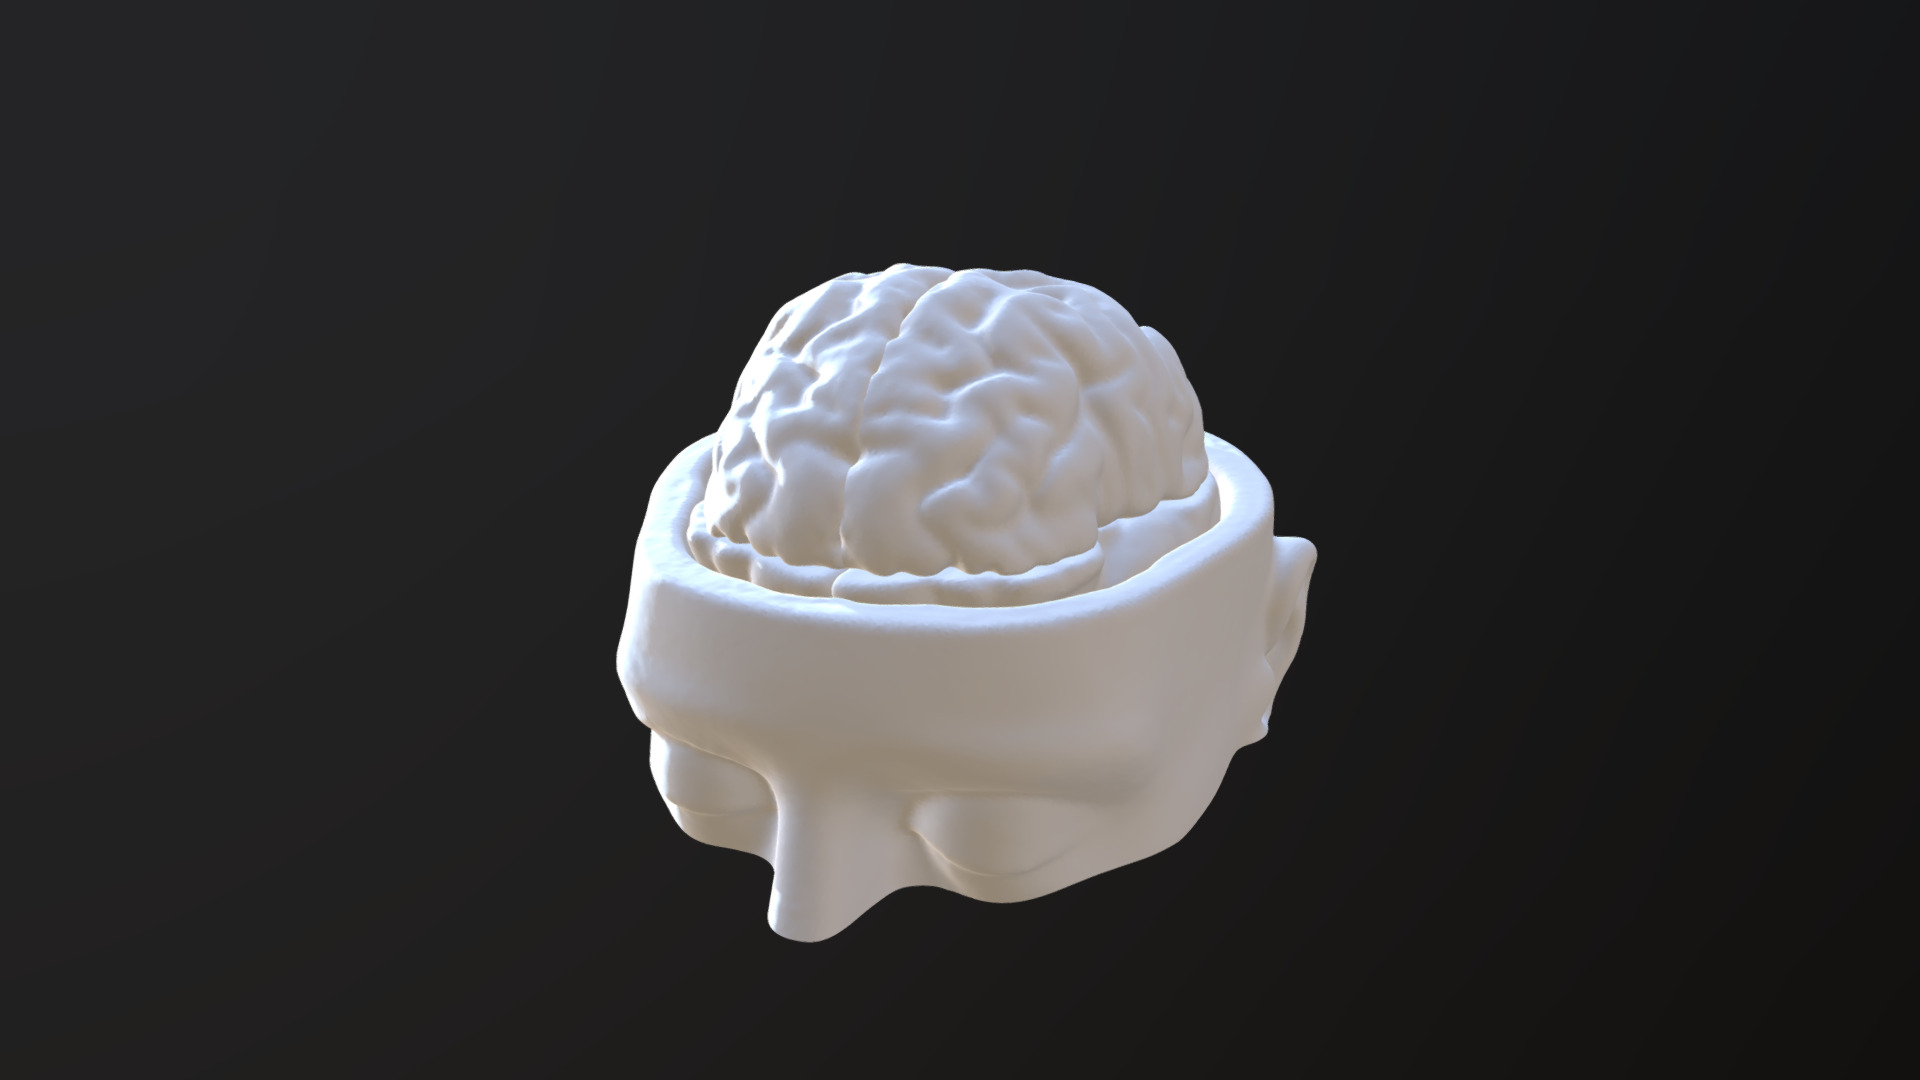 3D model Brain - This is a 3D model of the Brain. The 3D model is about a white cupcake with a white frosting on top.